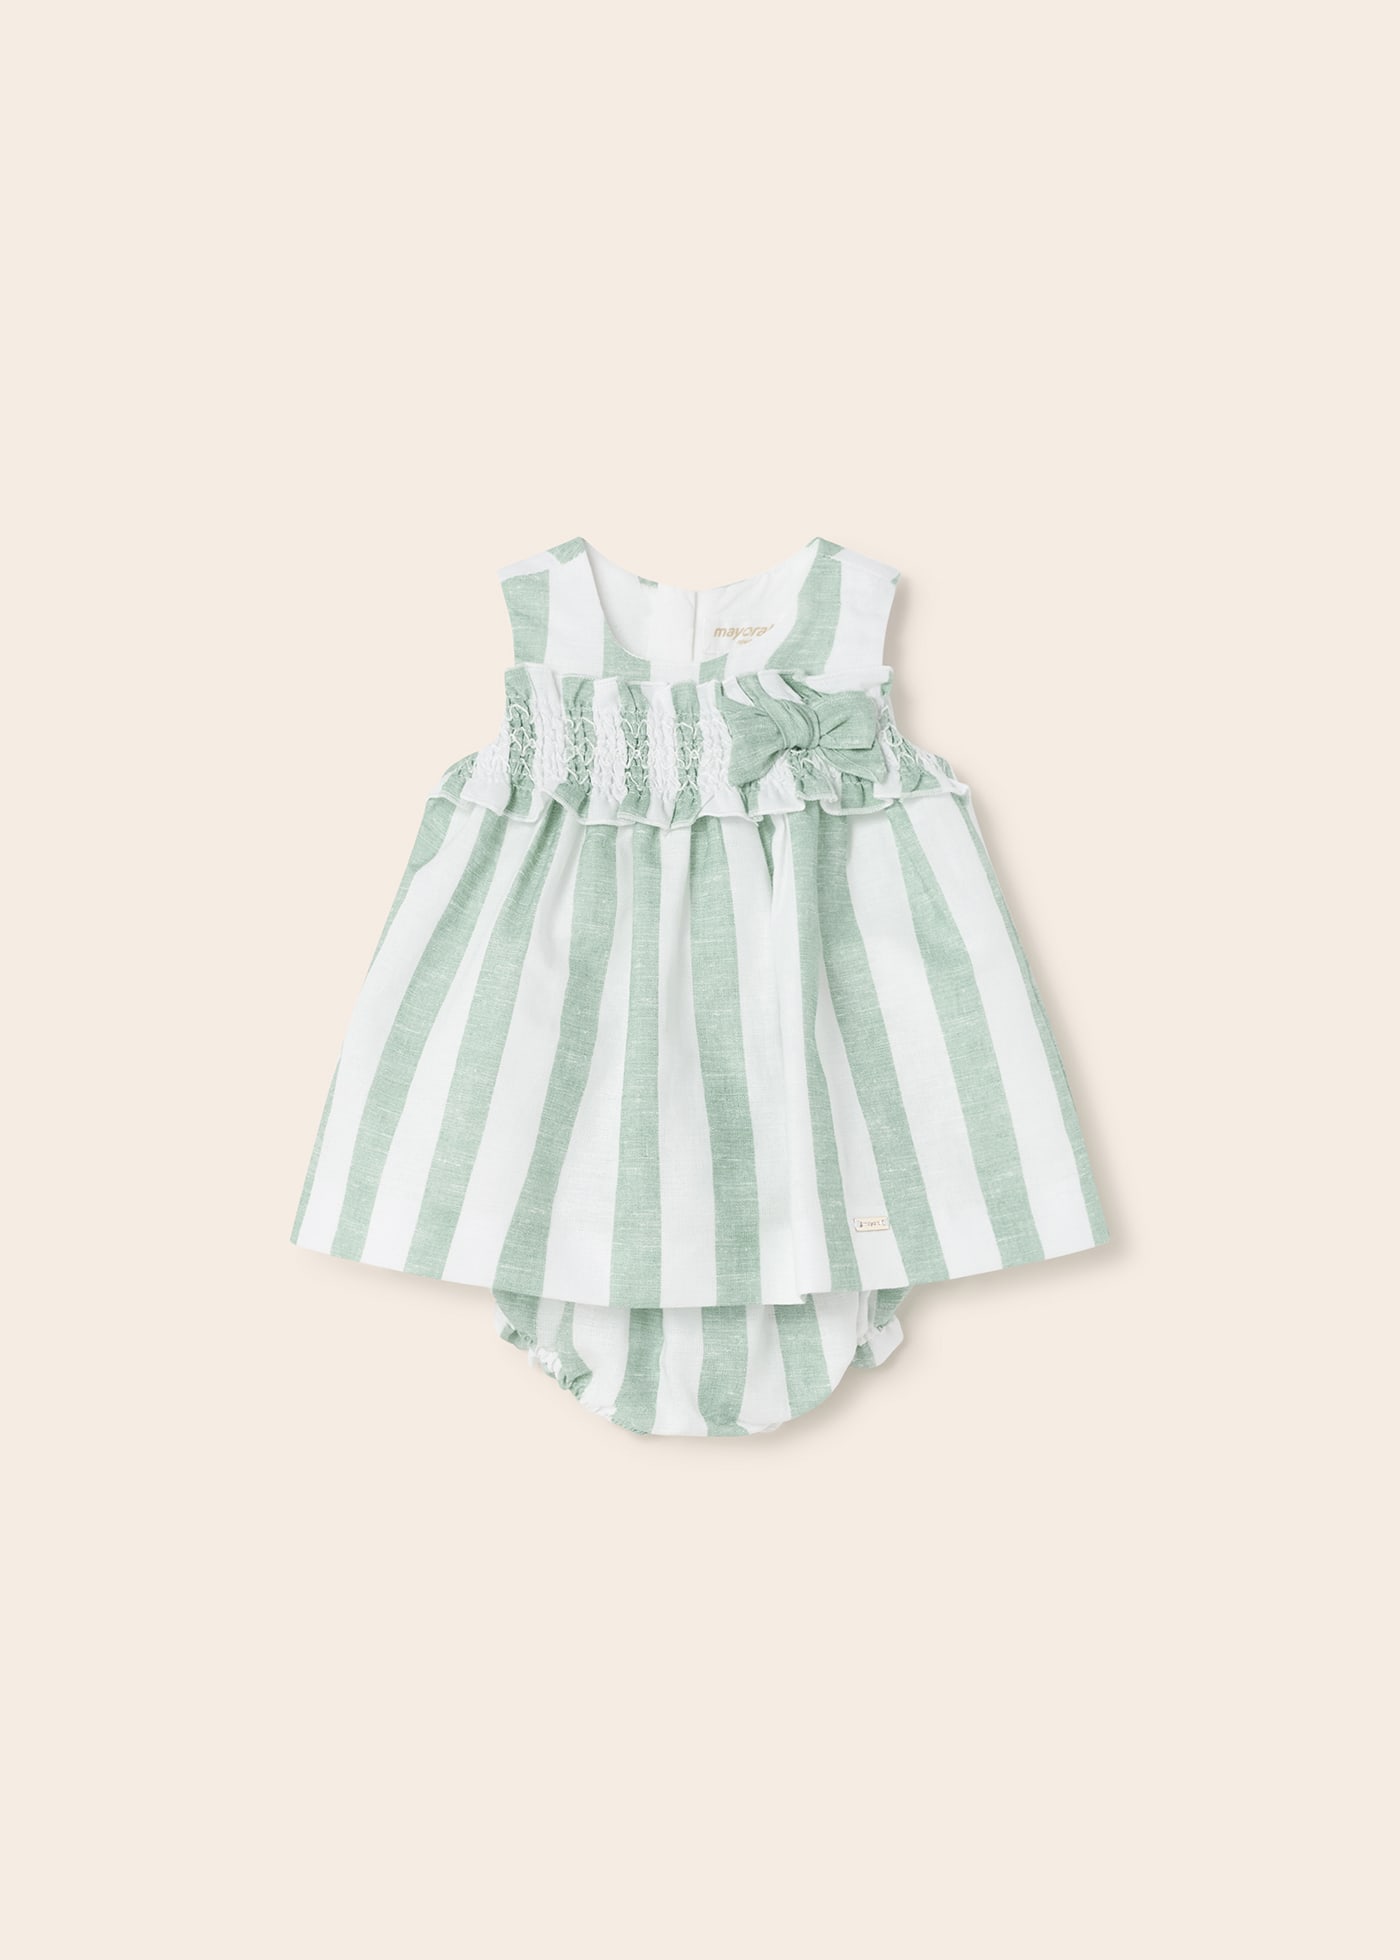 Linen print dress with nappy cover newborn